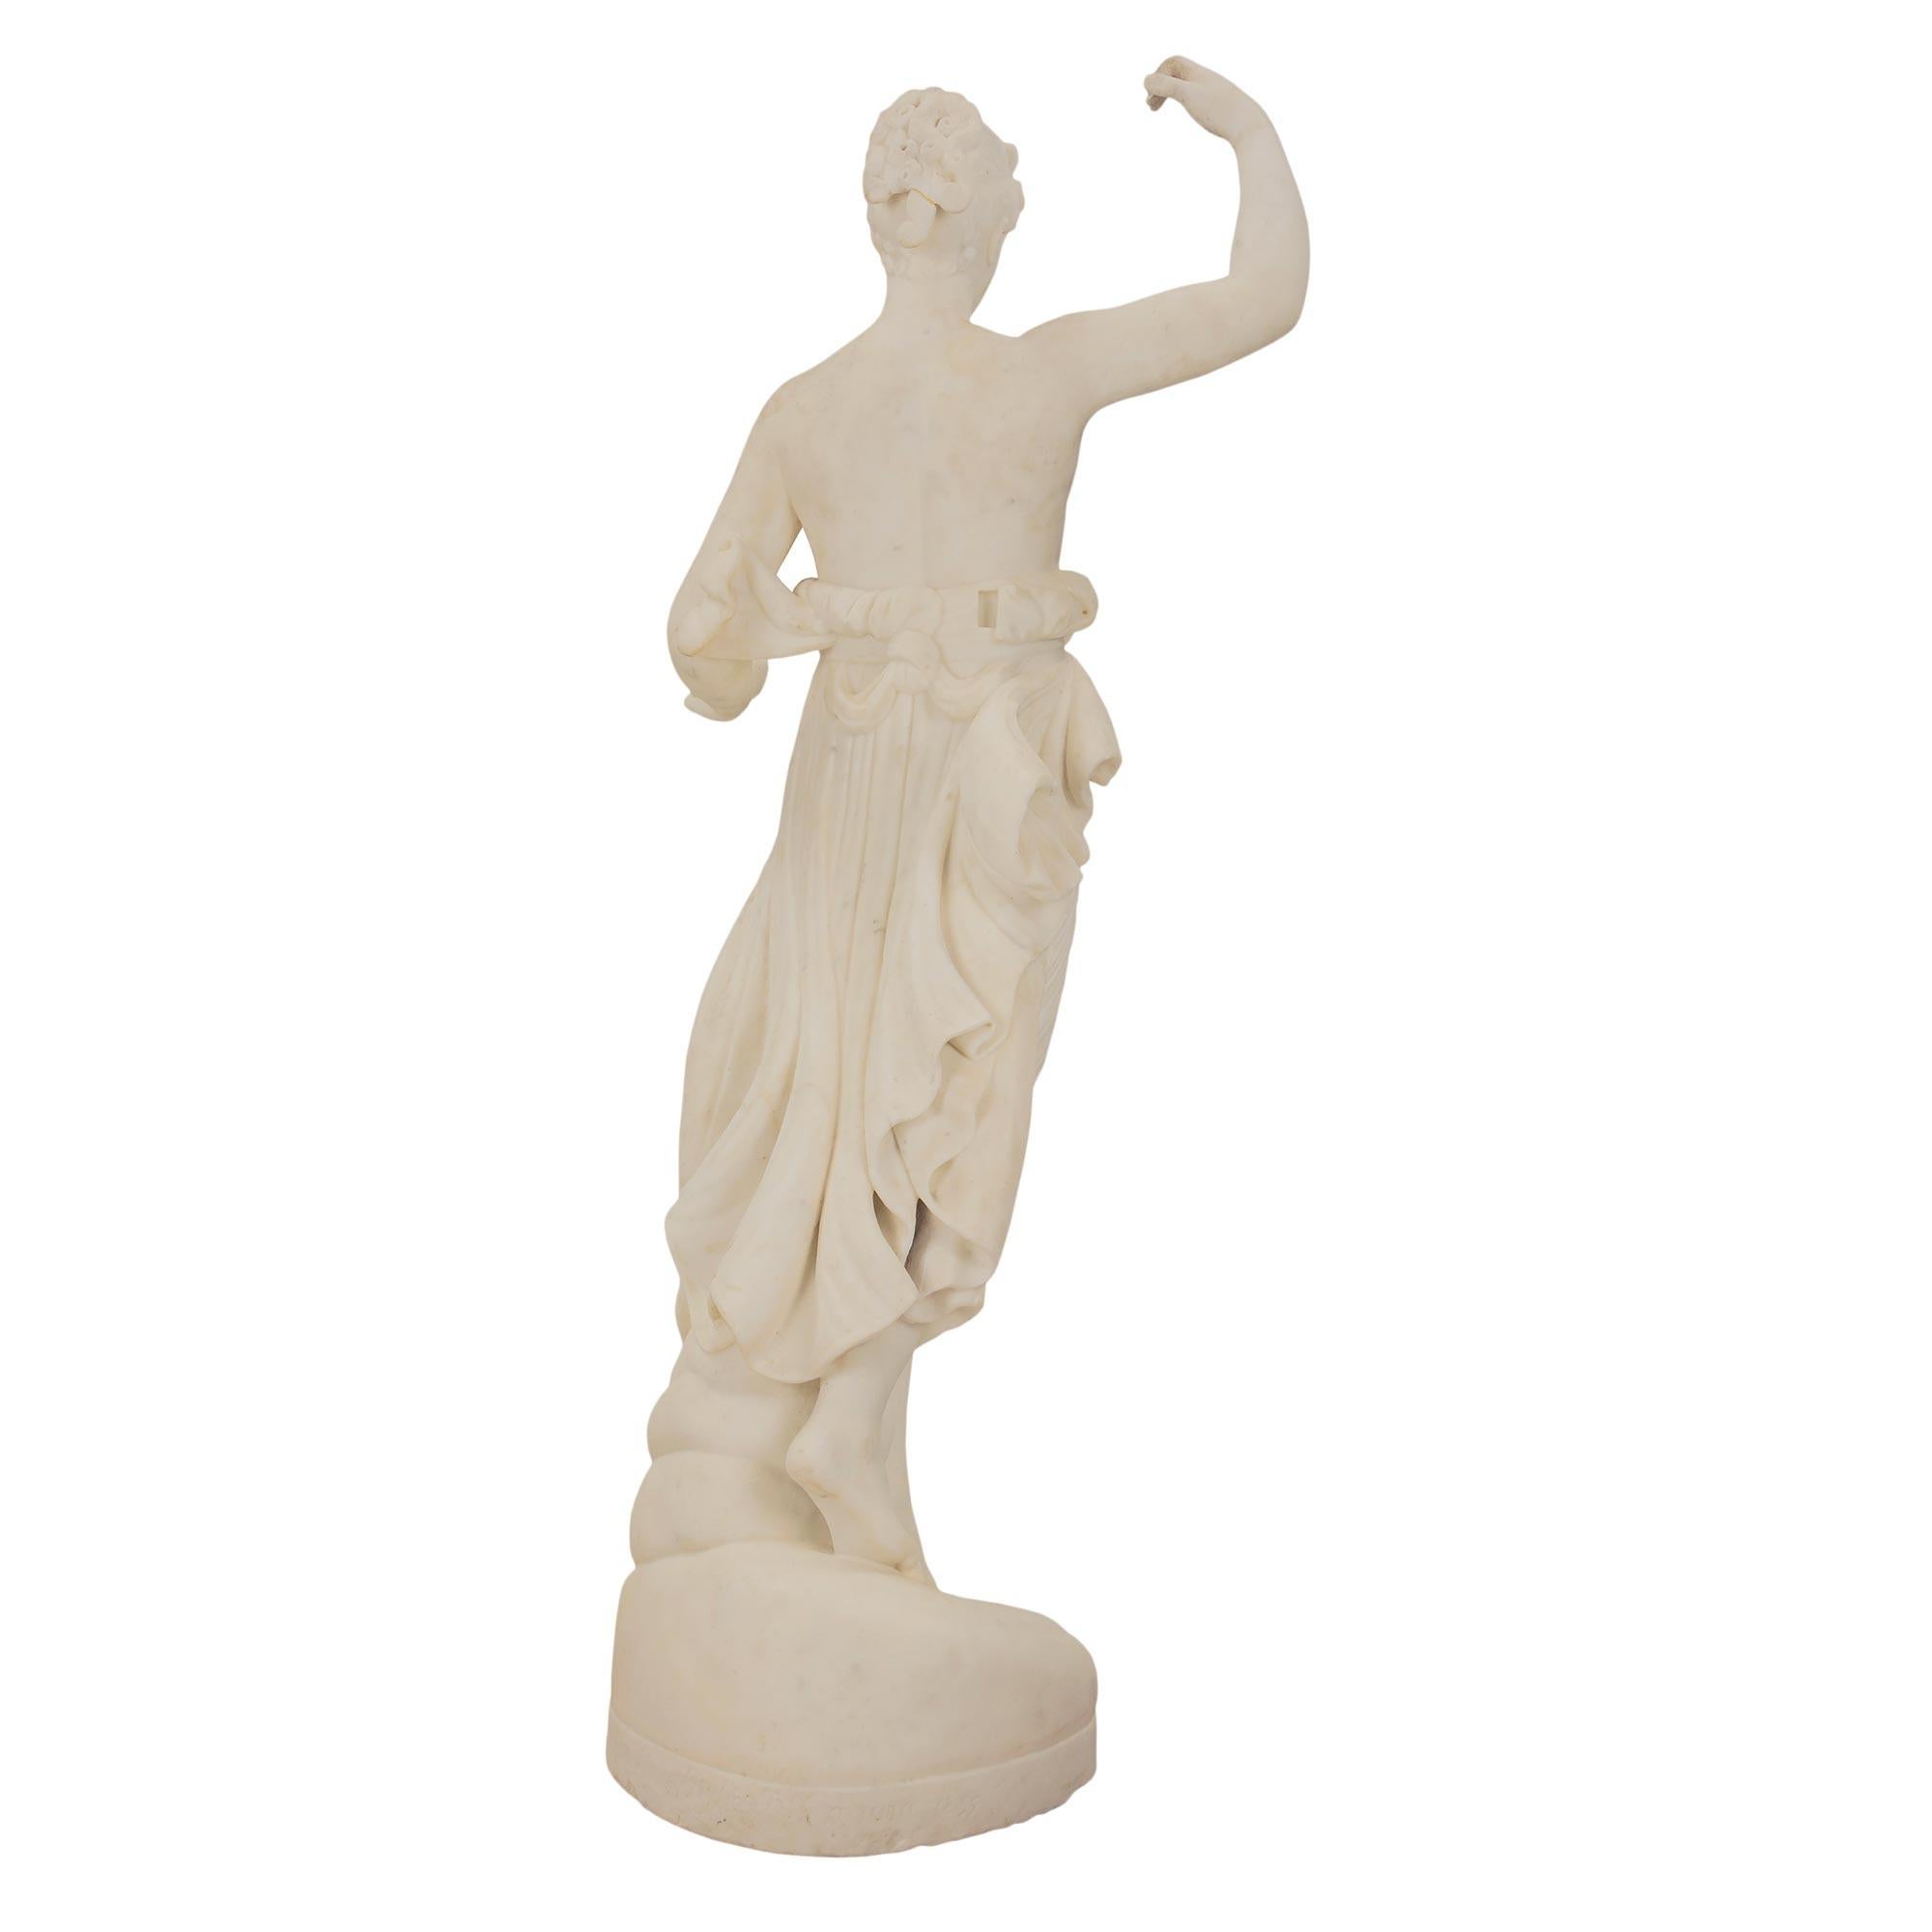 Italian Mid-19th Century Neoclassical St. White Carrara Marble Statue In Good Condition For Sale In West Palm Beach, FL